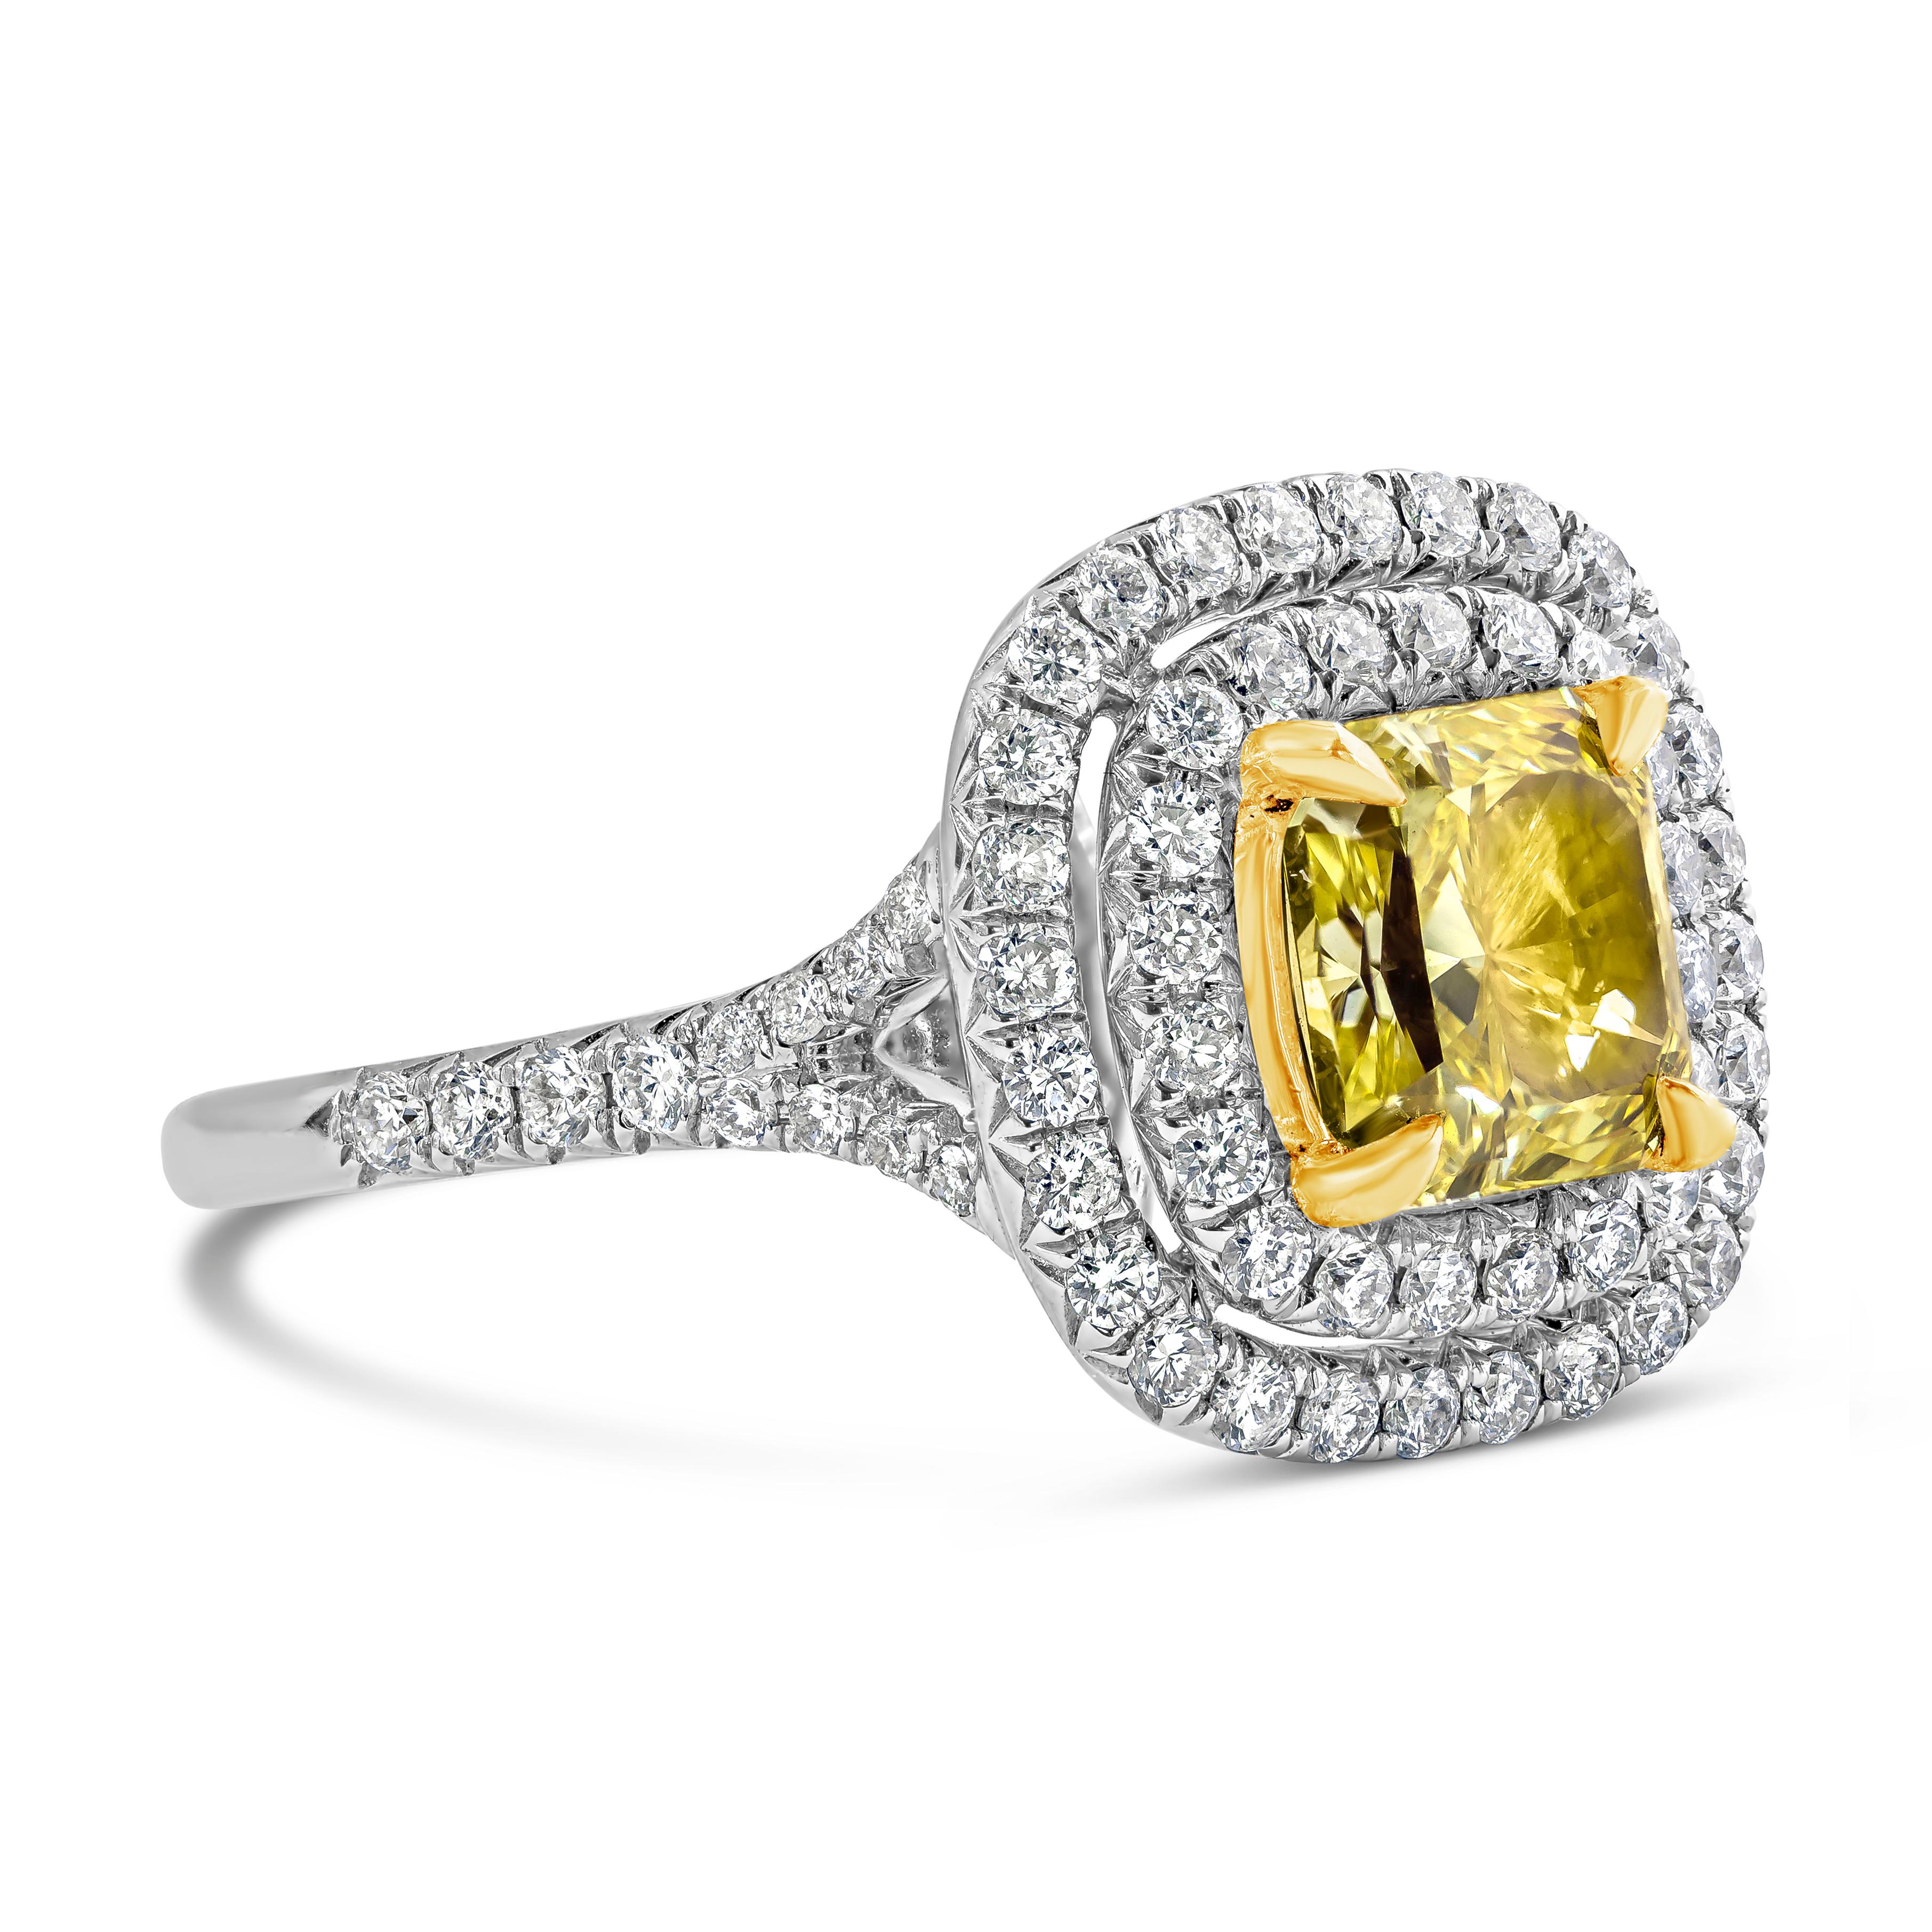 A magnificent piece because of it's natural brilliance and luster. Showcases a 1.59 carat radiant cut yellow diamond that GIA certified as Fancy Intense Yellow color, VS1 clarity. Surrounding the center are 2 rows of sparkling round diamonds in an